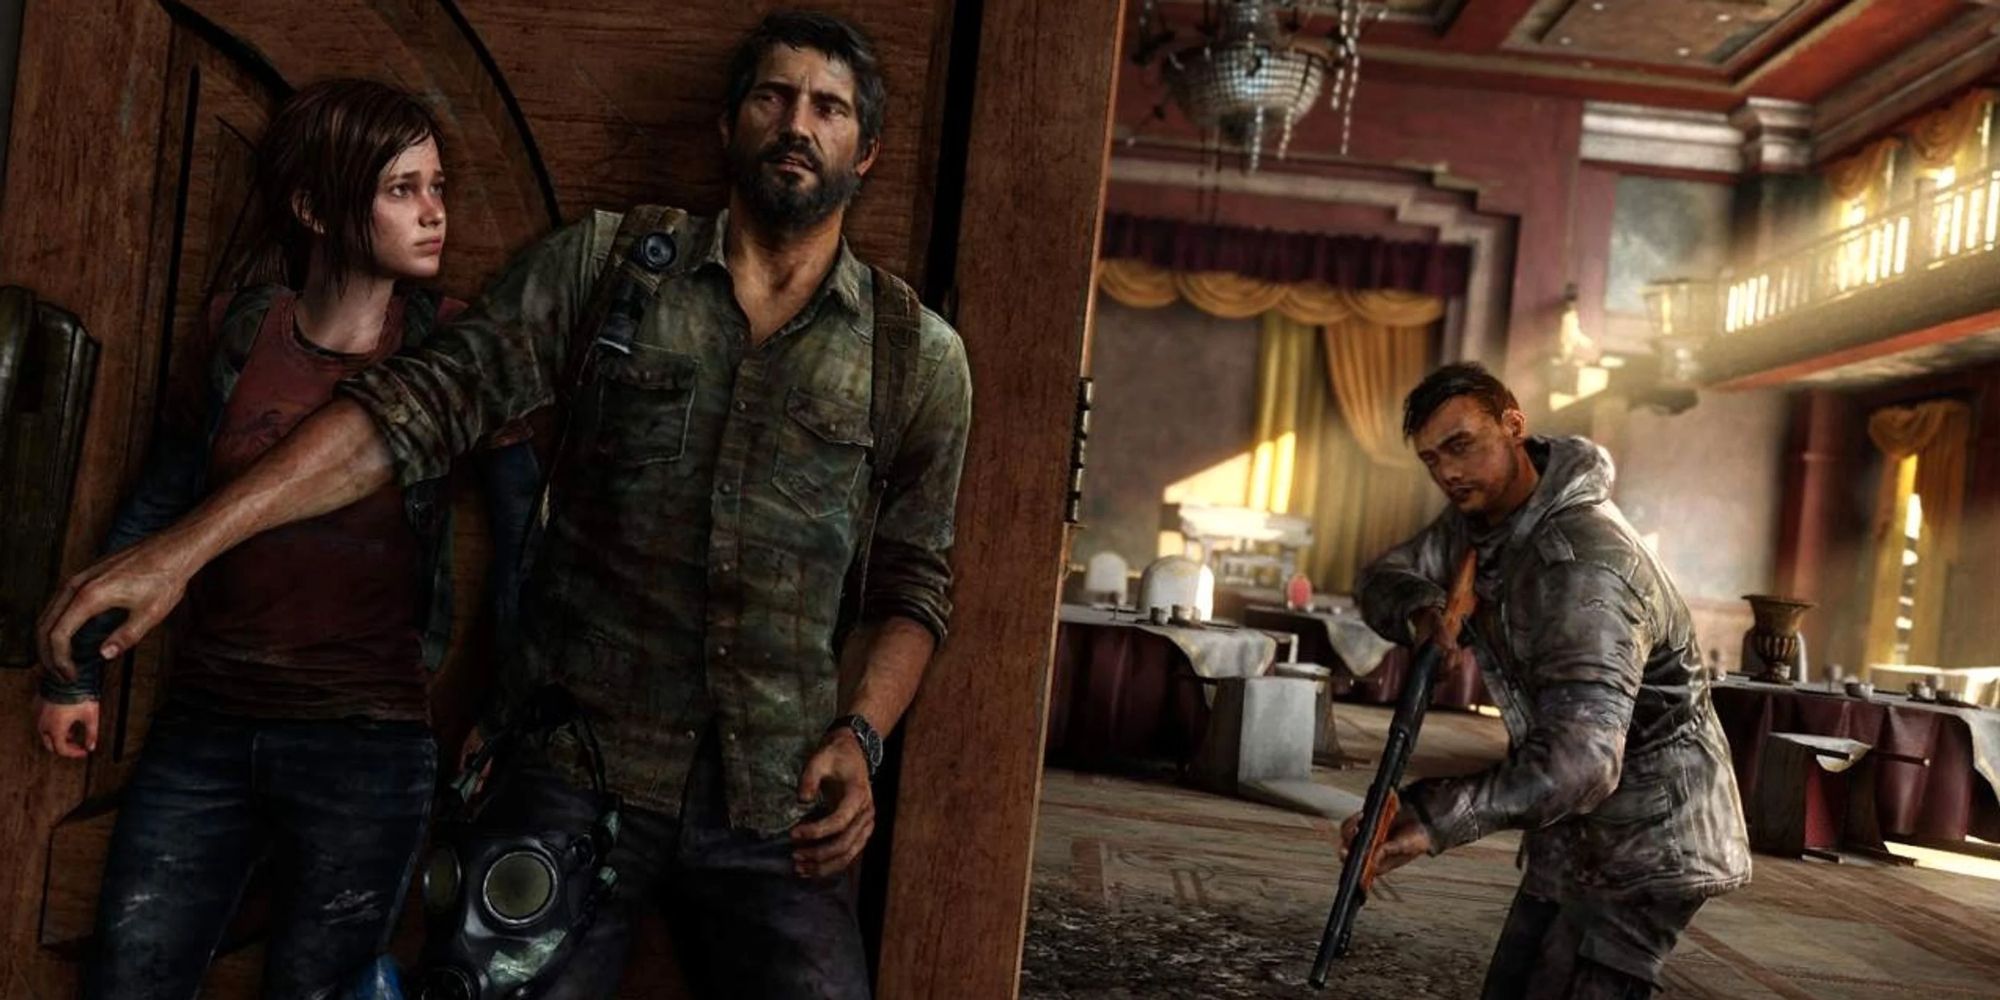 The Last of Us Set Video Teases Show’s Possible Hunters Scene